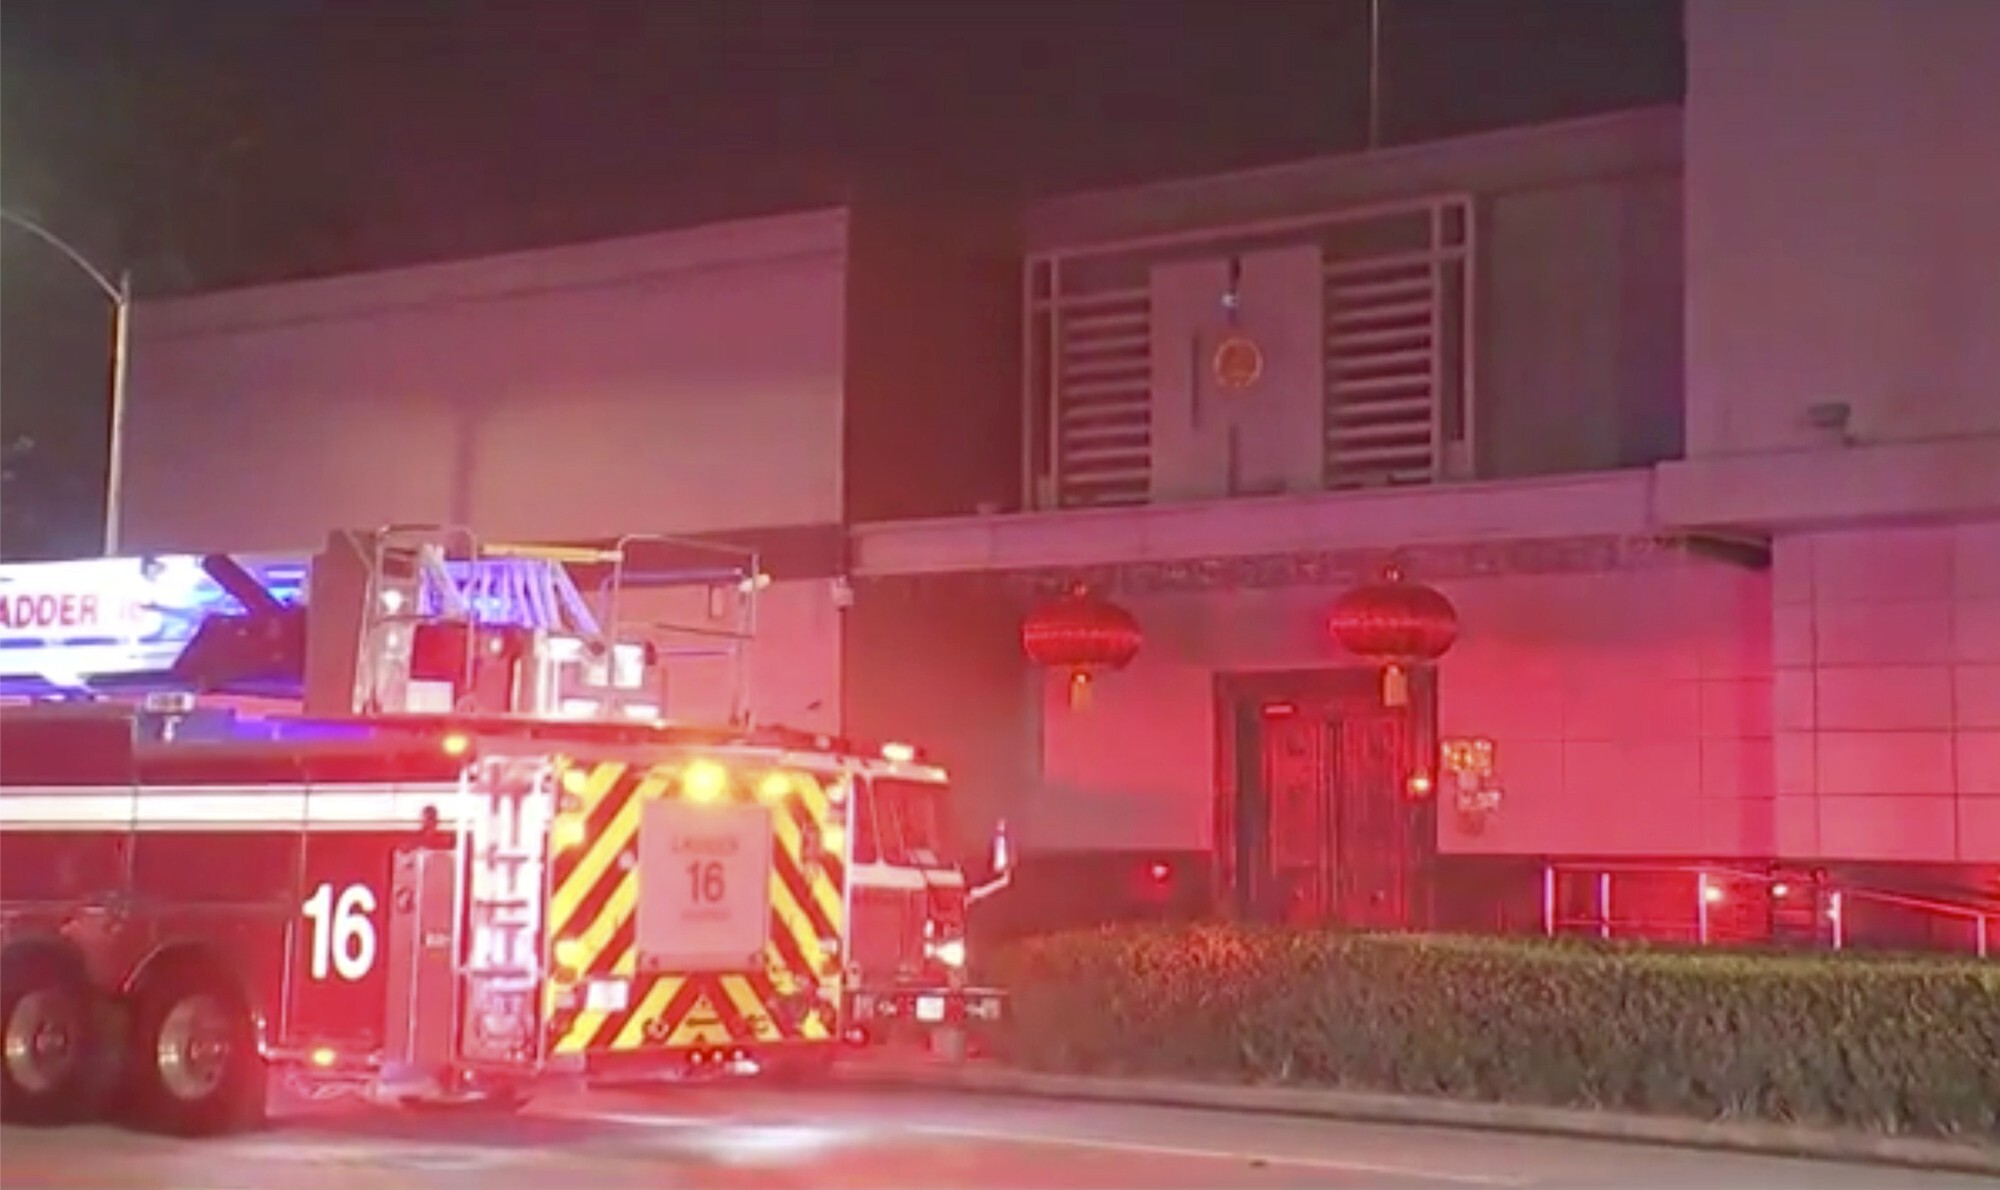 In this image made from video, a fire engine is seen outside the Chinese consulate in Houston on Tuesday, July 21, 2020. Media reports in Houston said that authorities had responded to reports of a fire at the consulate. Witnesses said that people were burning paper in what appeared to be trash cans, the Houston Chronicle reported, citing police. Photo: KTRK via Associated Press